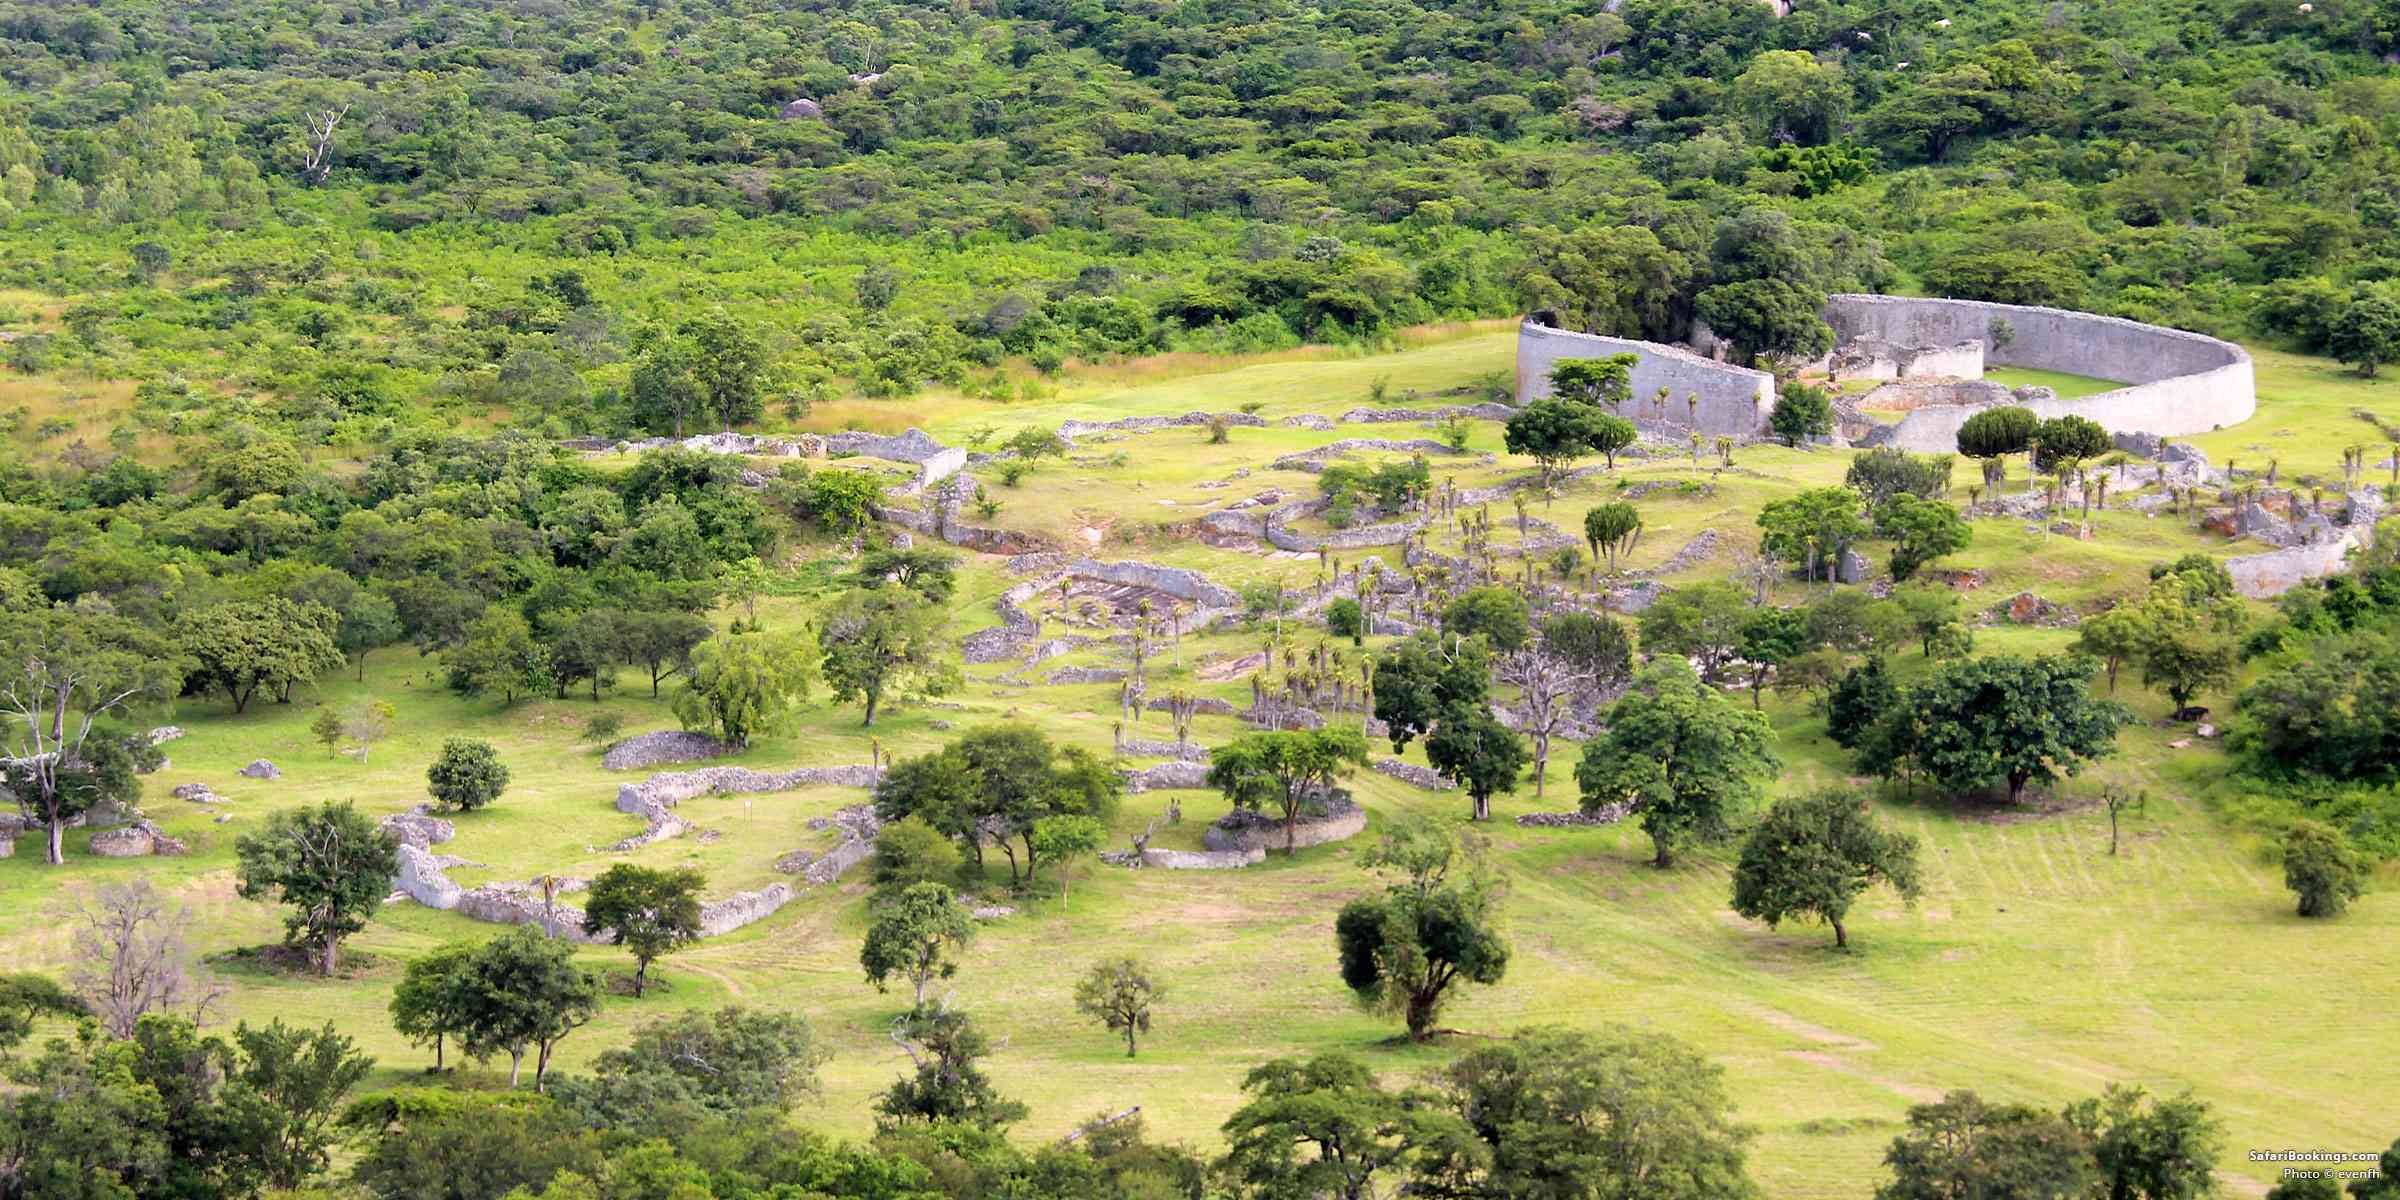 Great Zimbabwe Is the Largest Stone Structure South of the Sahara